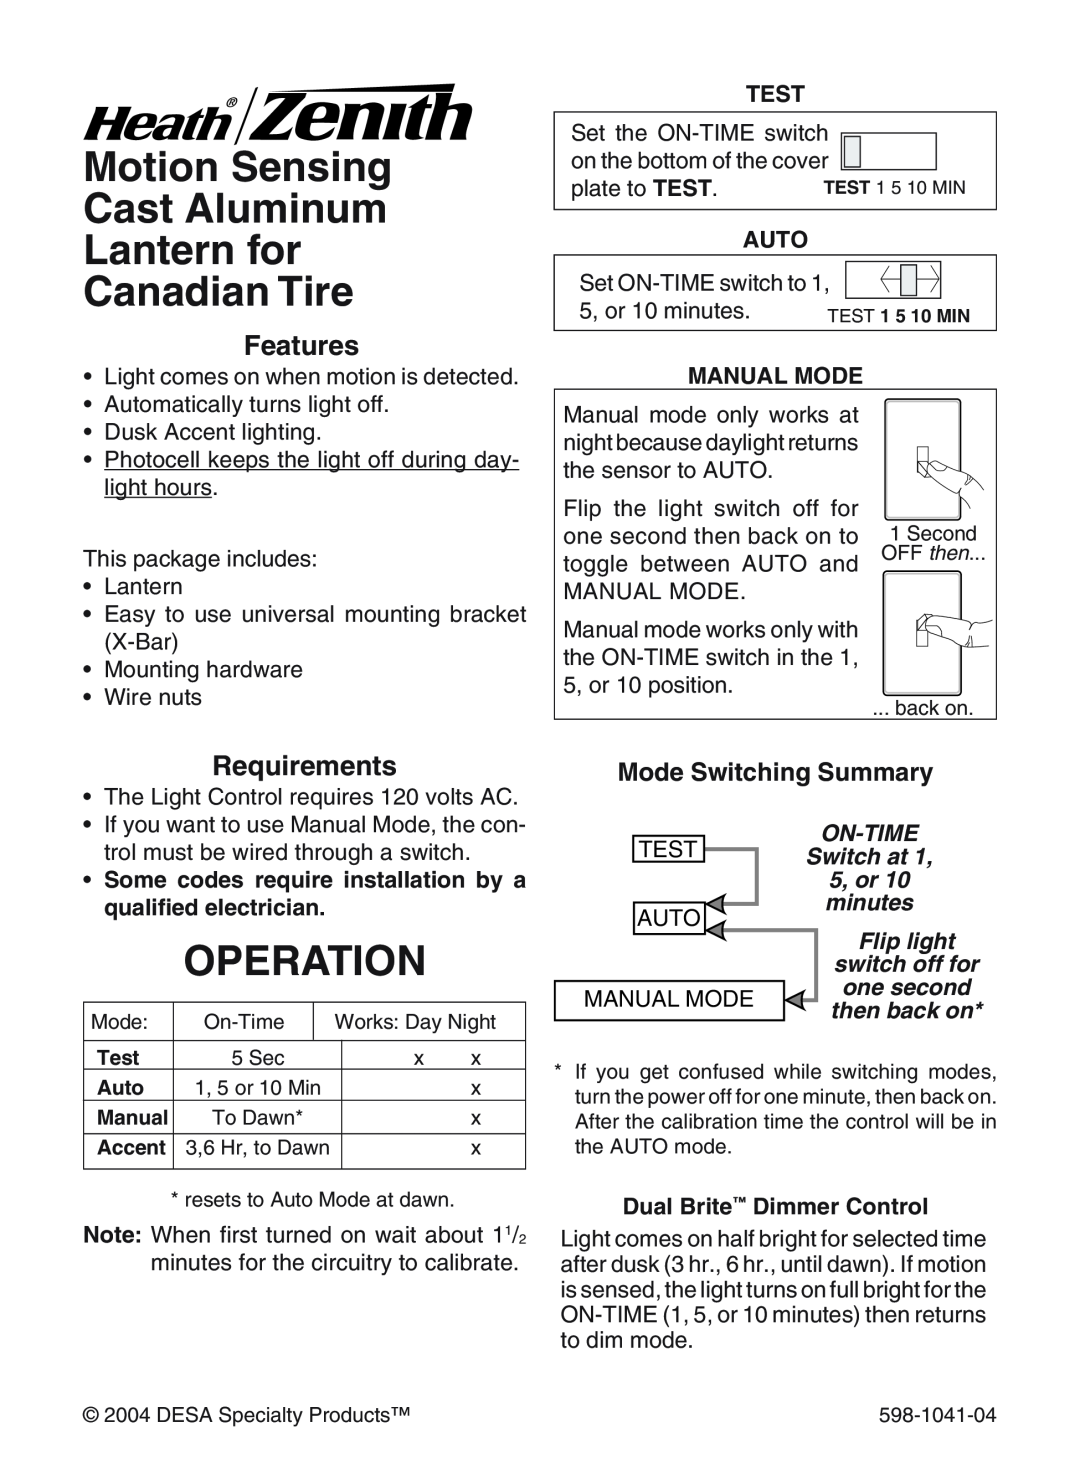 Heath Zenith 598-1041-04 manual Motion Sensing Cast Aluminum Lantern for, Canadian Tire, Operation, Features, Requirements 